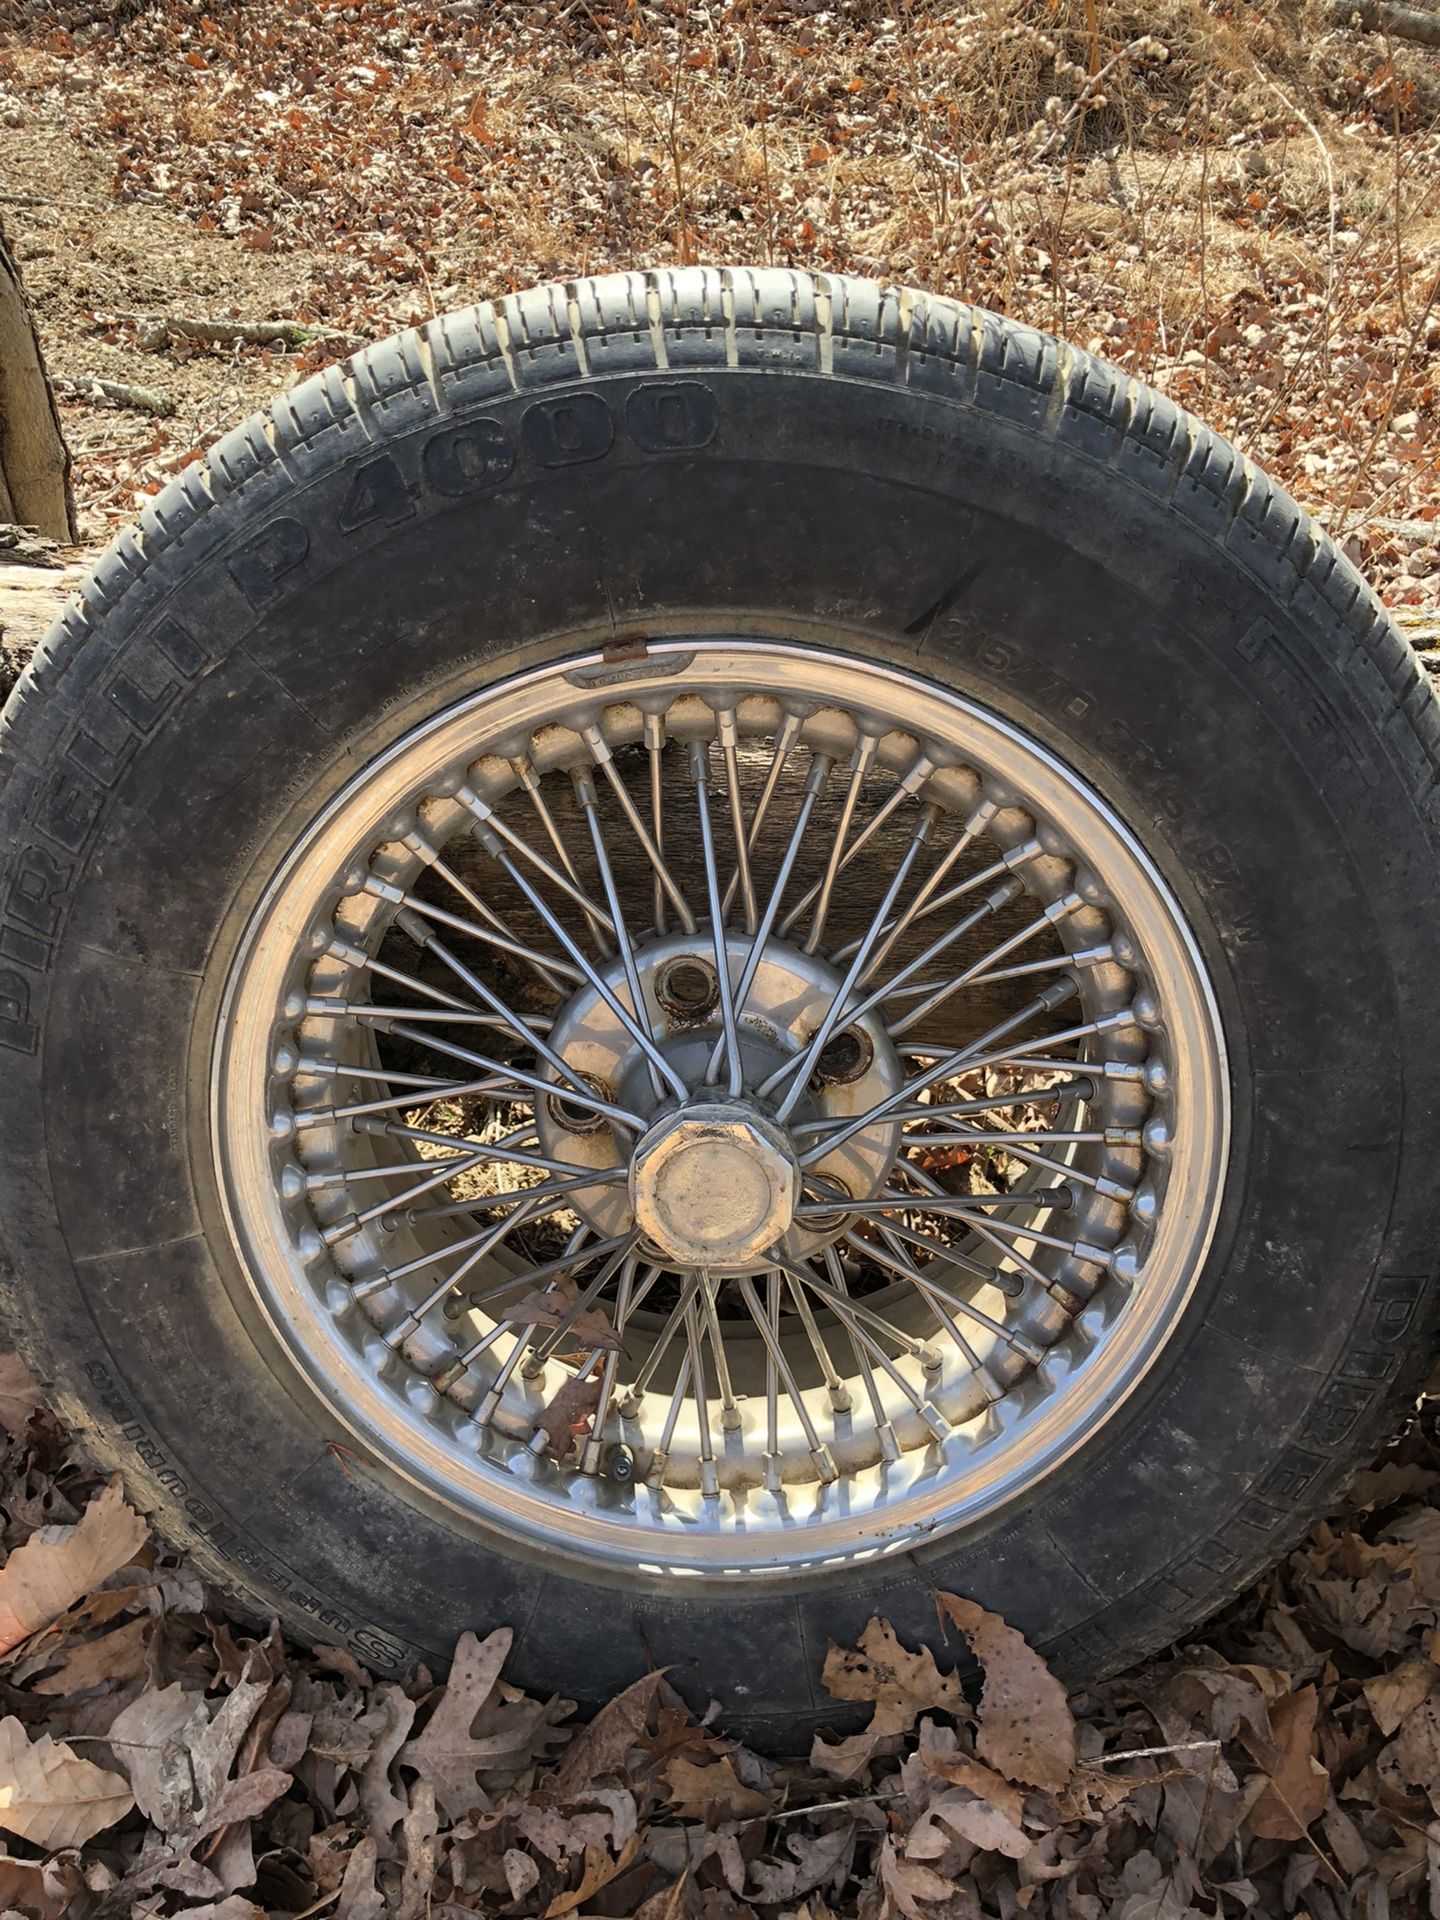 Jaguar wire spoke wheels. Have 4. With or without Pirelli tires